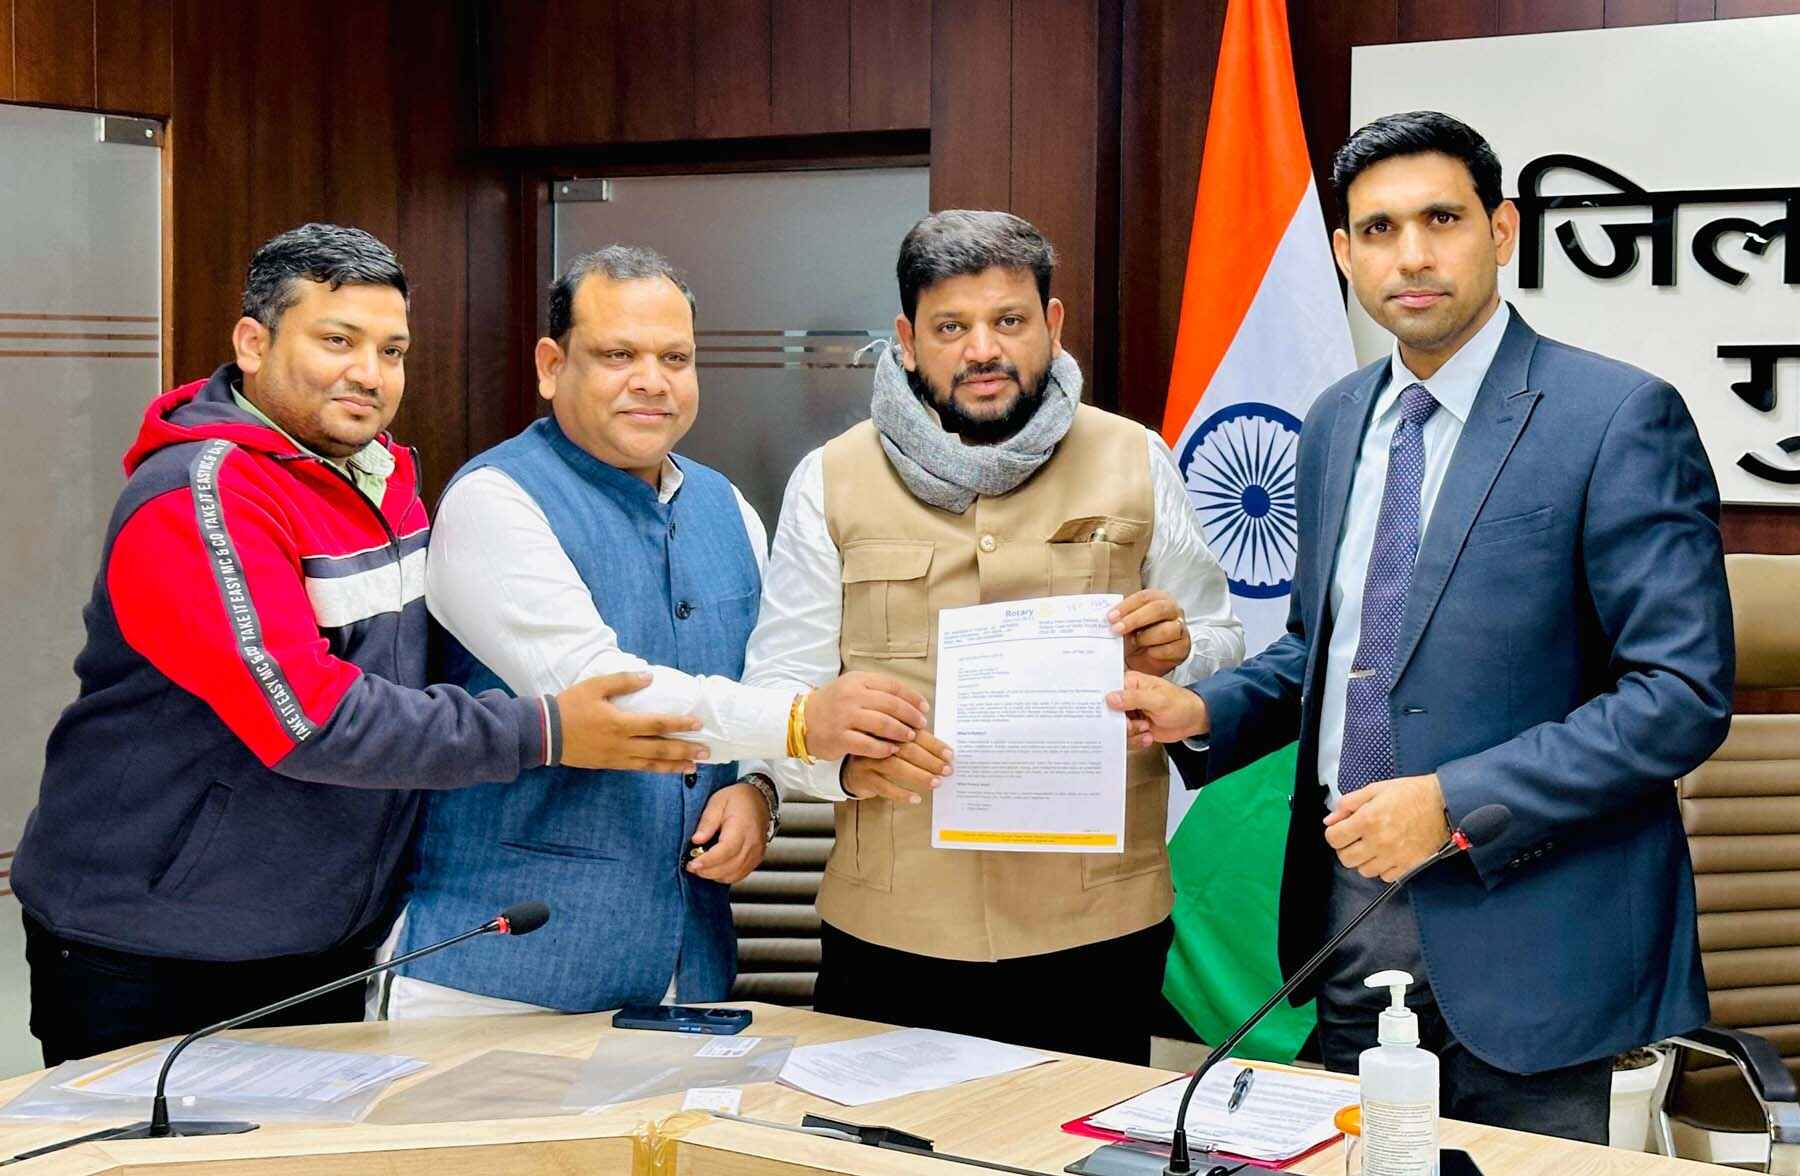 handing over a letter to Deputy Commissioner Nishant Kumar Yadav for work related to waste management and greenery of Gurugram